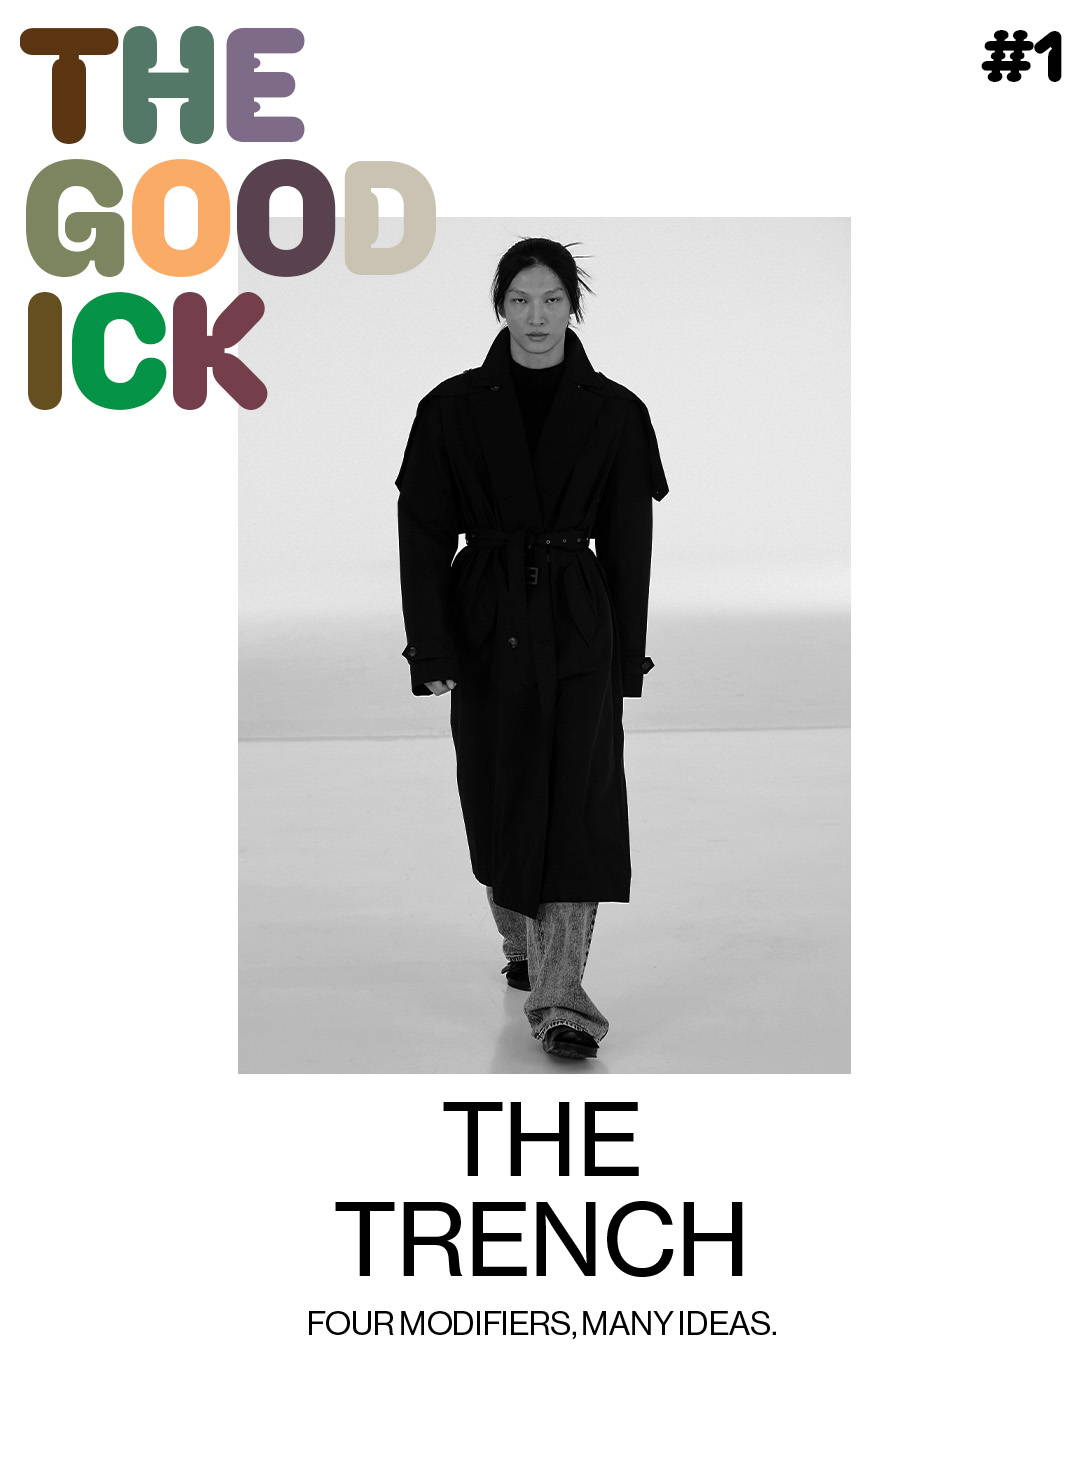 The Good Ick #1: The Trench